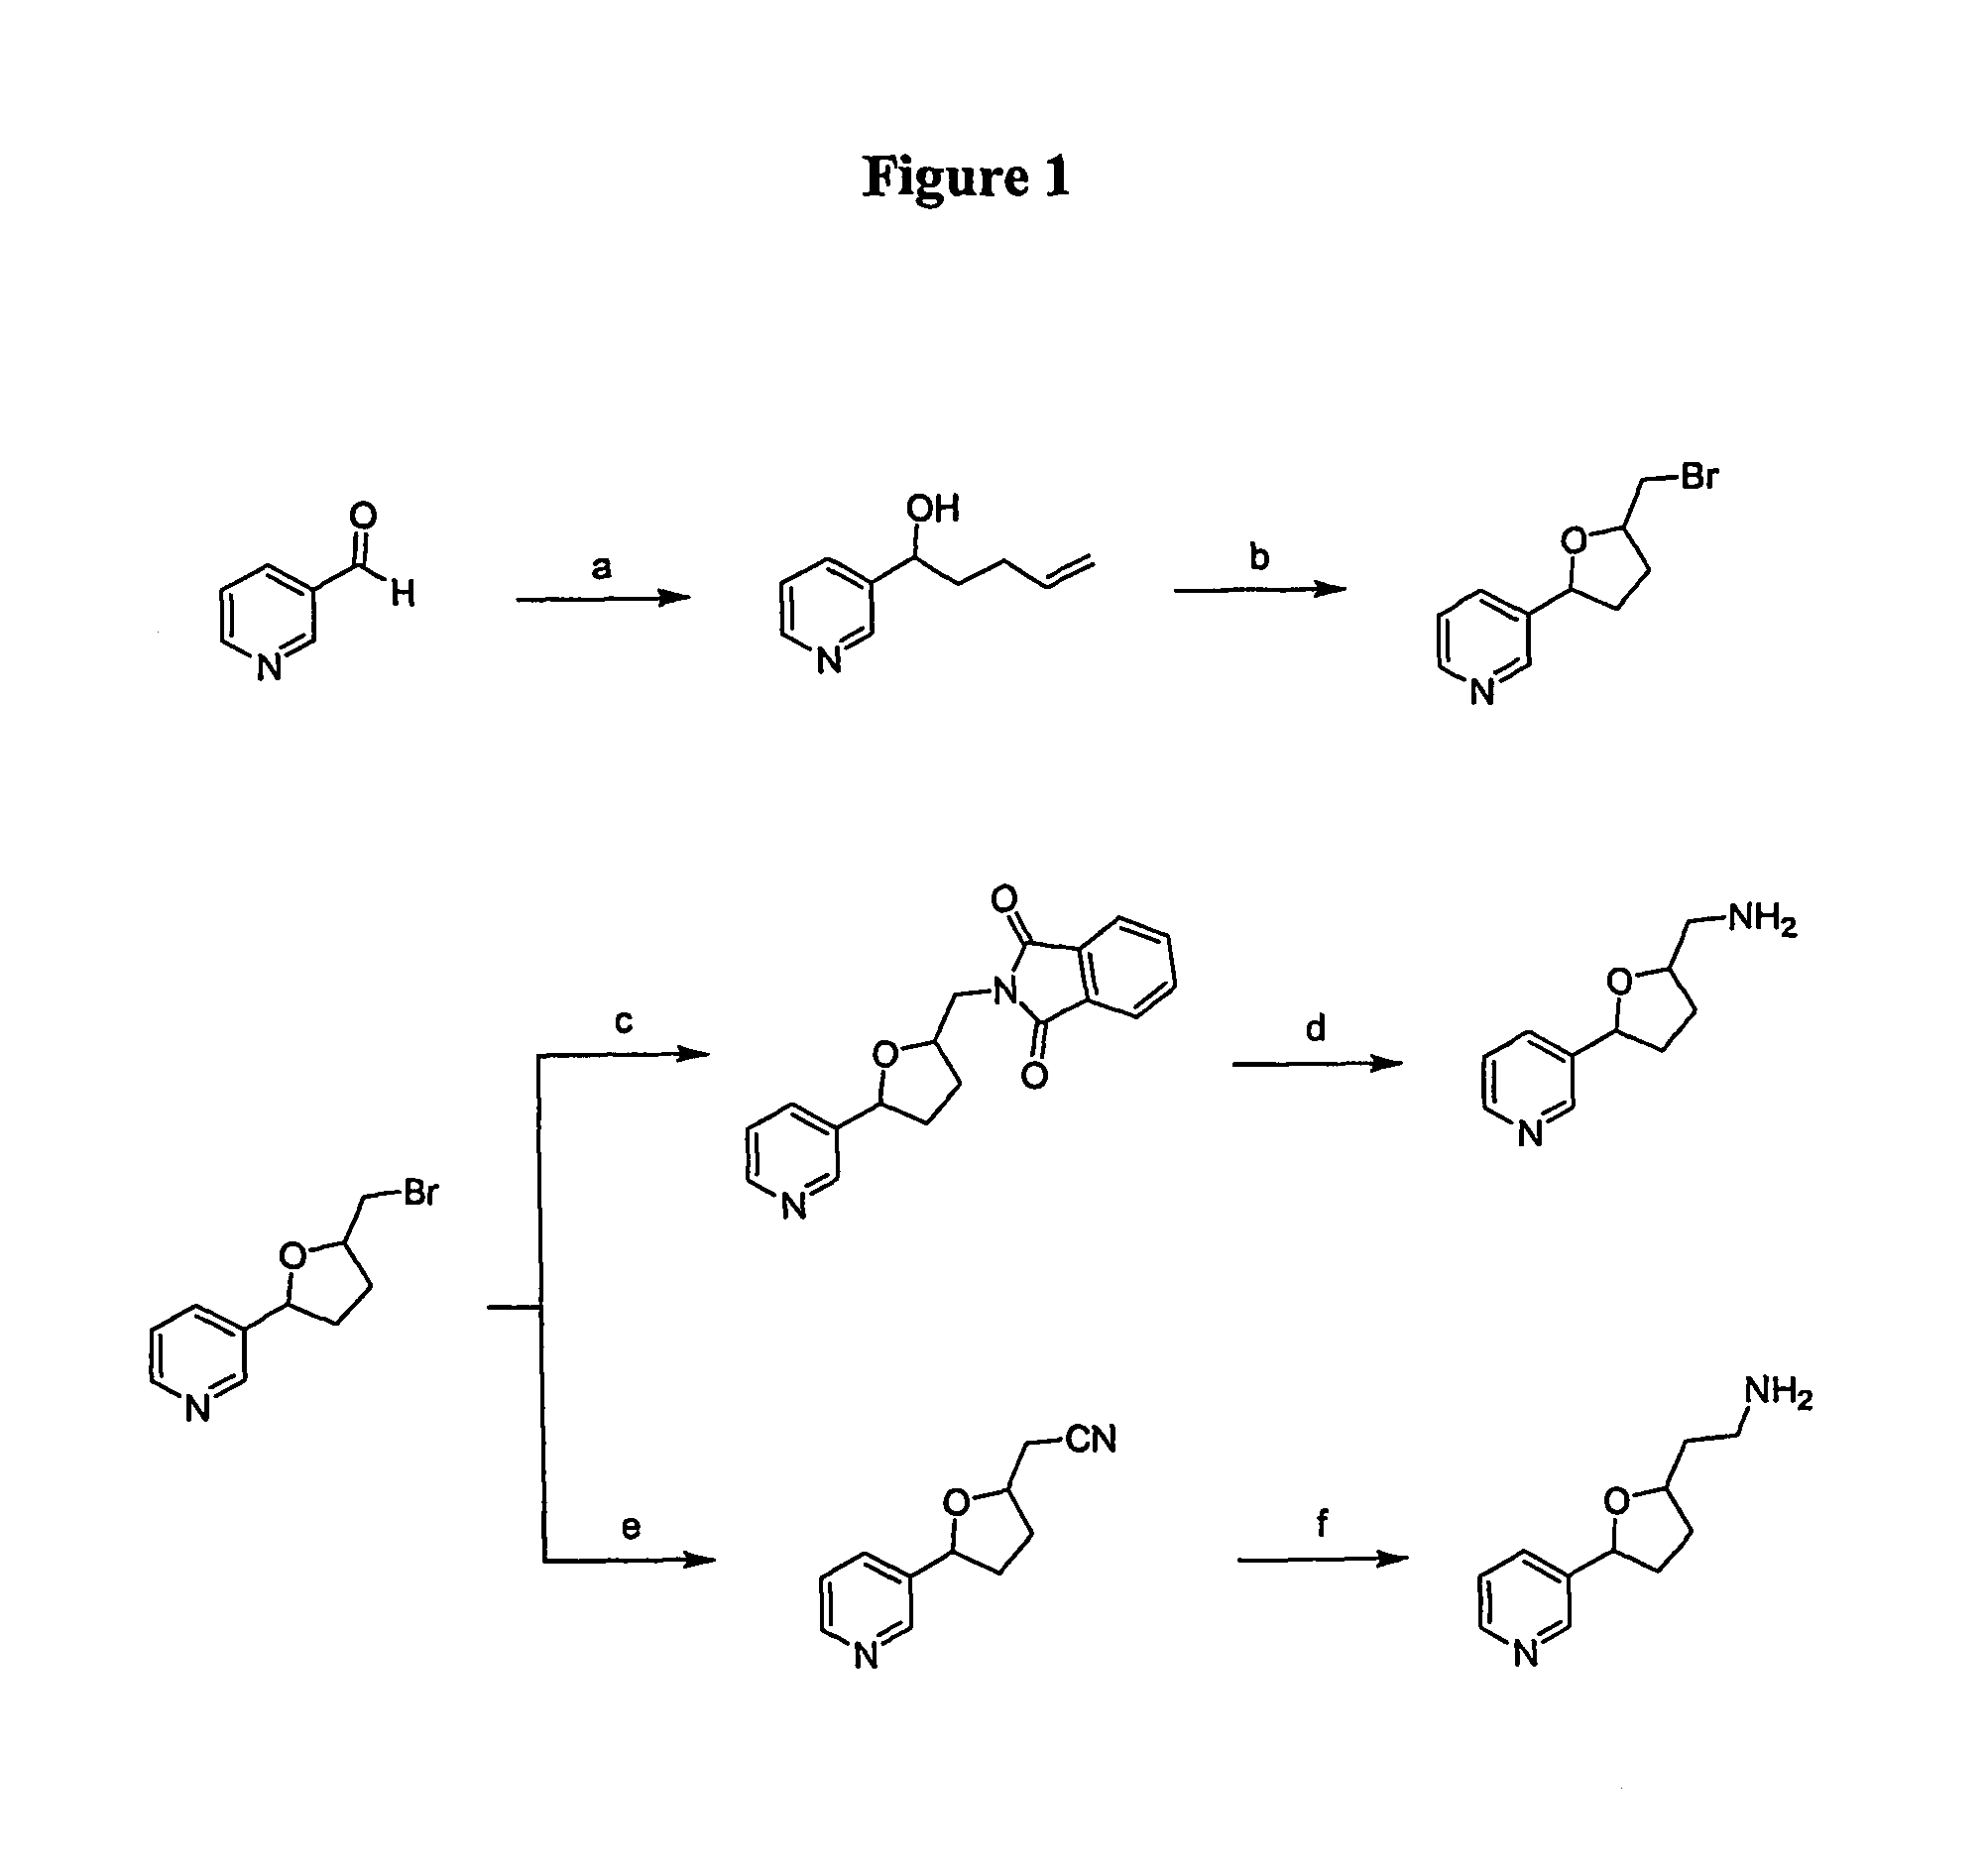 Synthetic Compounds and Derivatives as Modulators of Smoking or Nicotine Ingestion and Lung Cancer